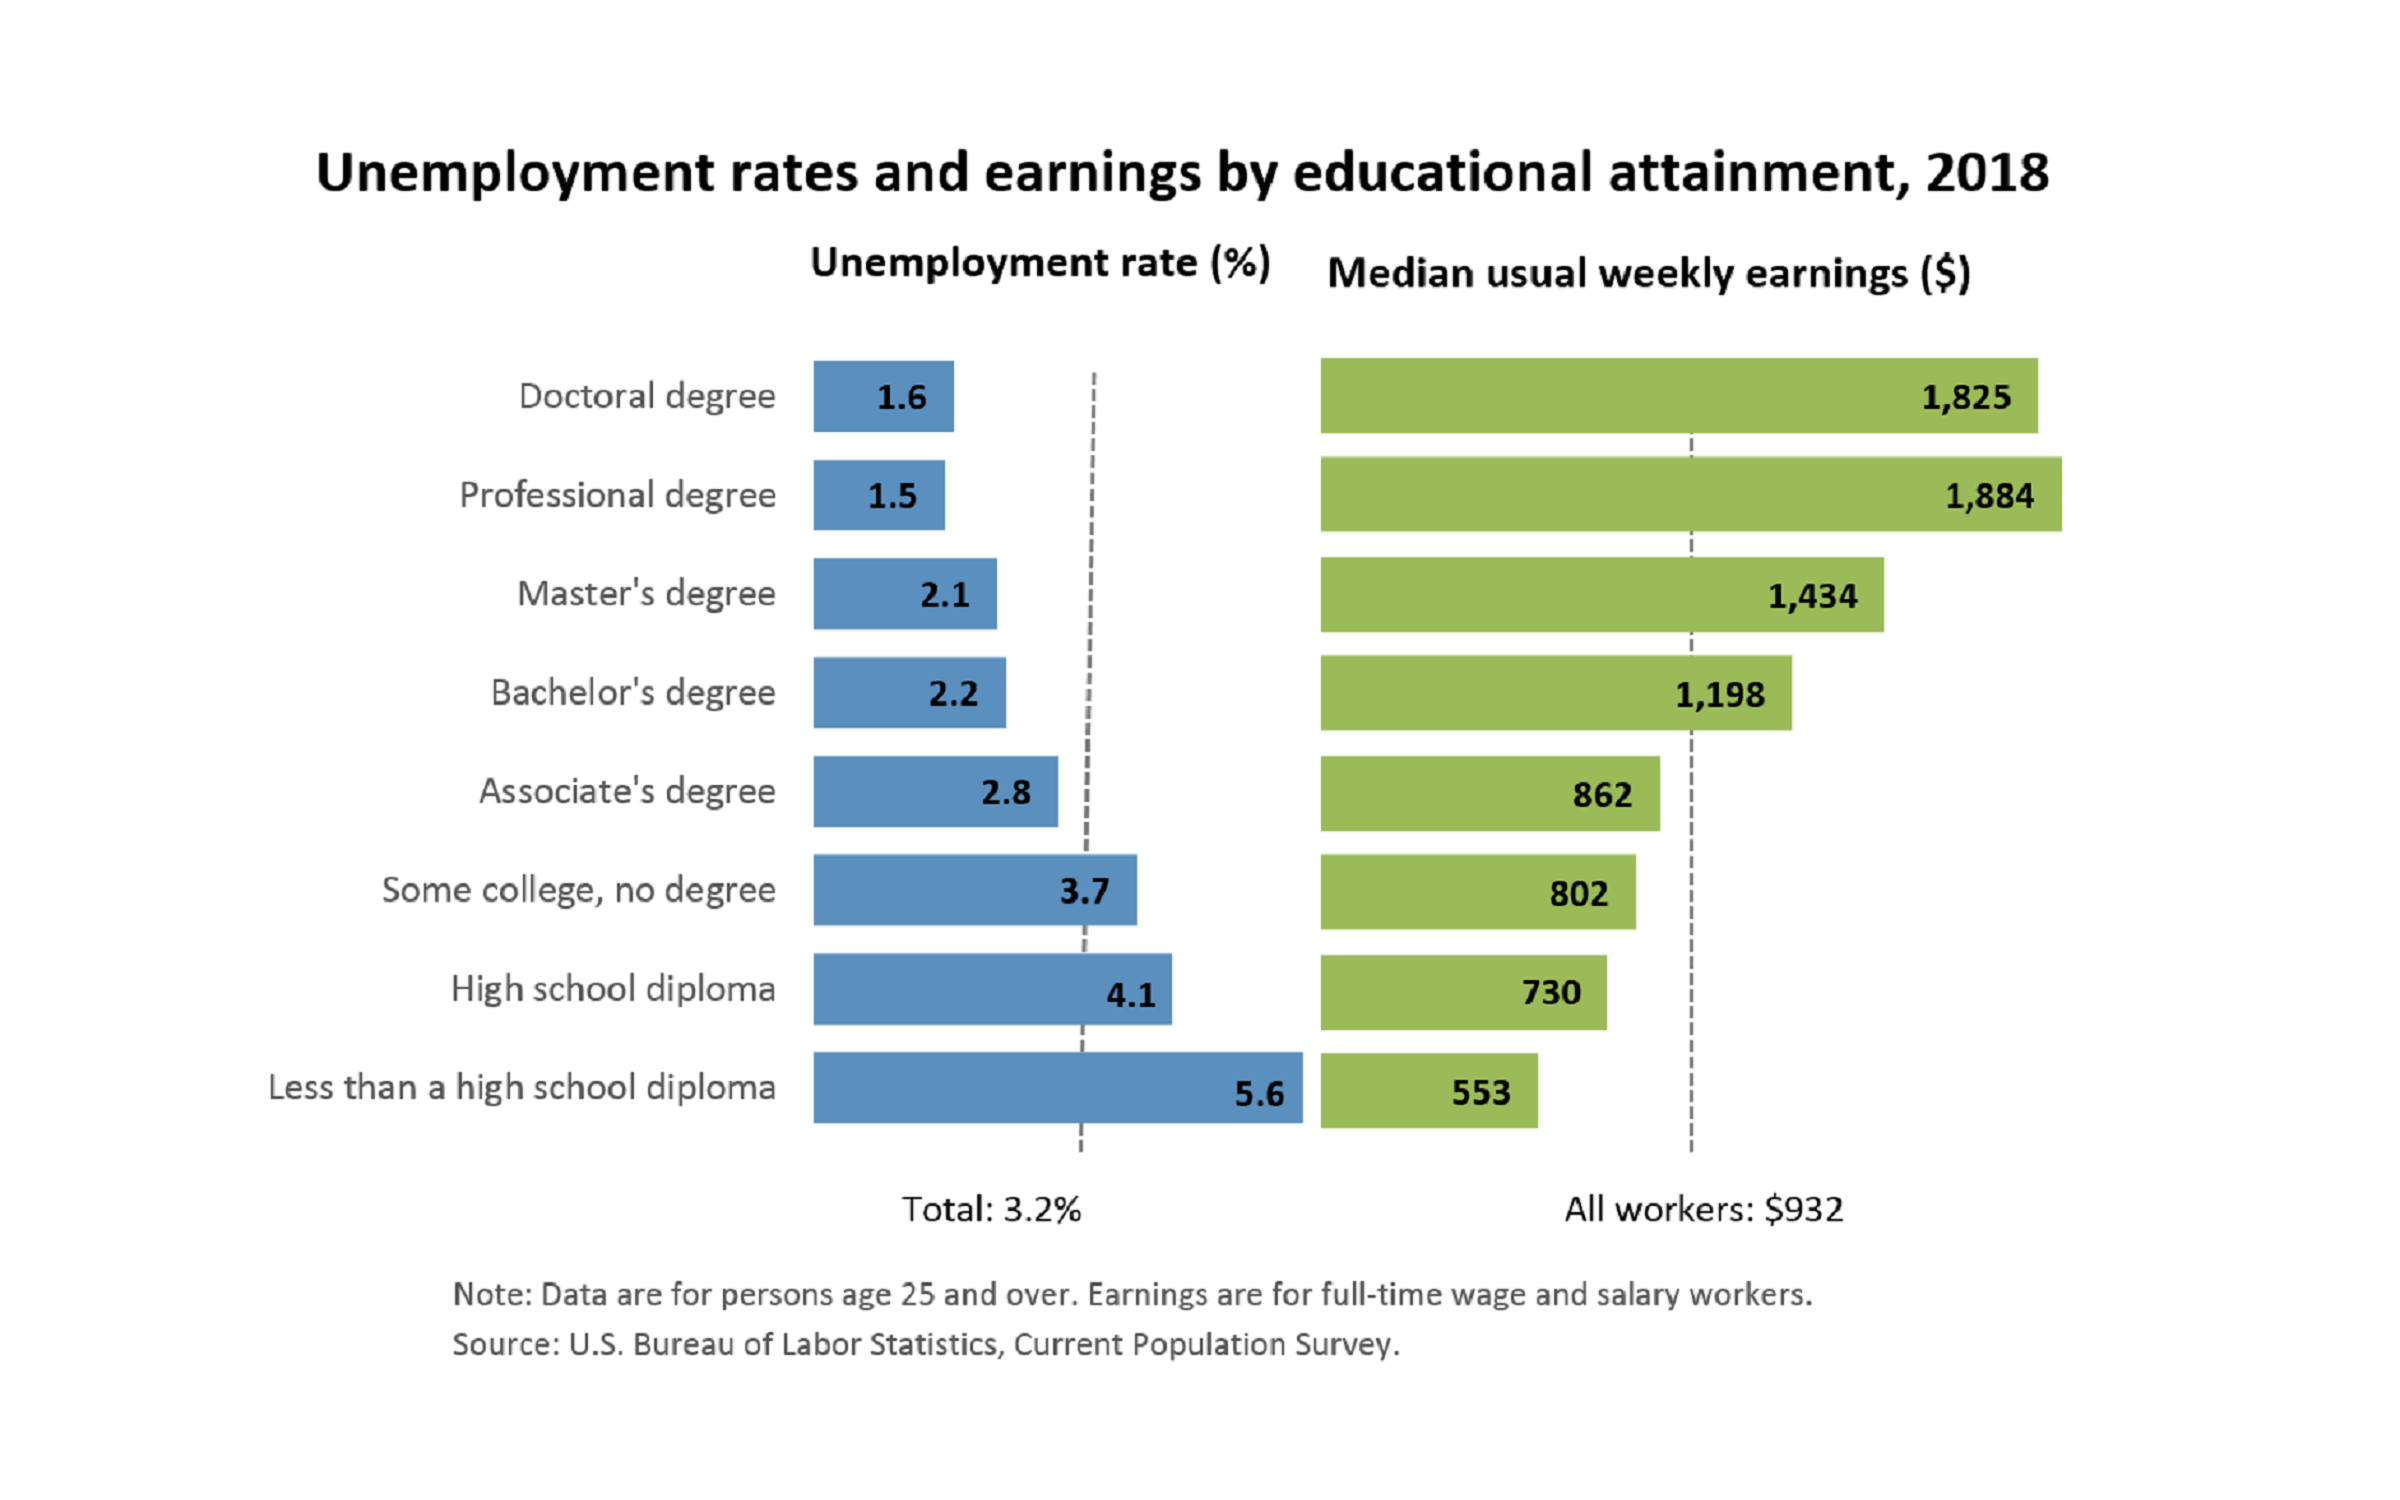 Comparative line graph showing the unemployment rate and earnings by educational attainment for 2018. The average unemployment rate is 3.2% where people with associate degrees or higher are under the unemployment rate. The median weekly earnings is $932 where people with bachelors degrees or higher make more than the median earnings. 